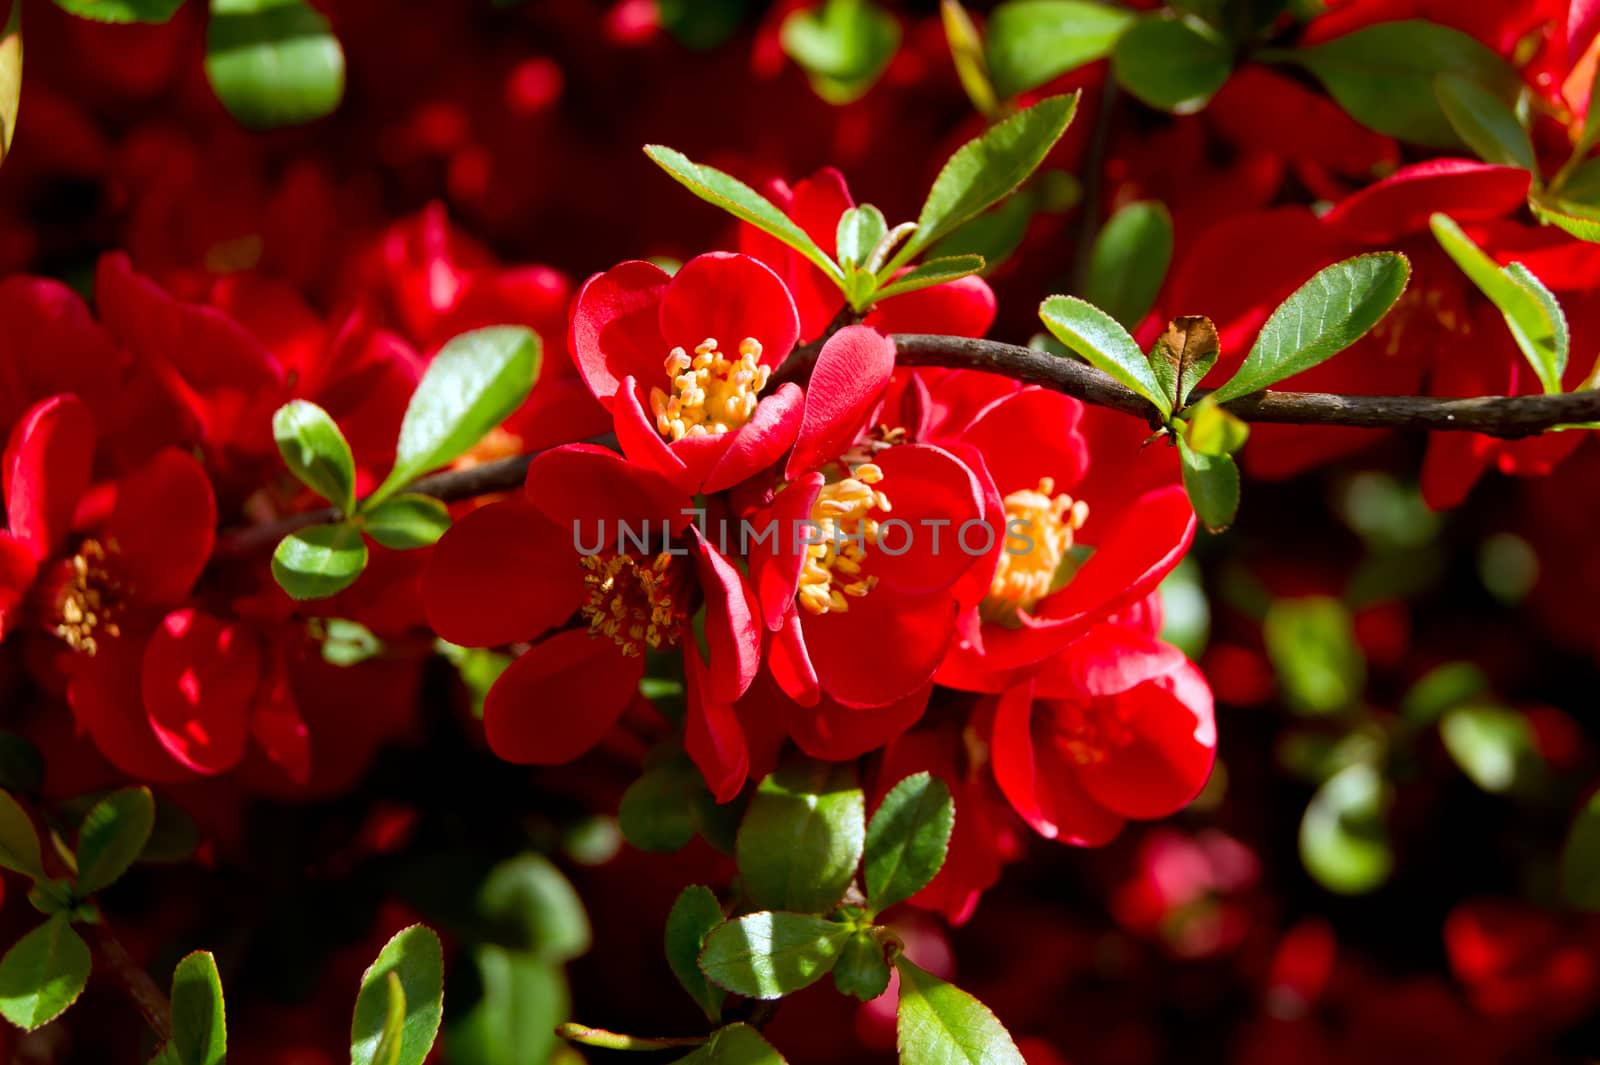 The Japanese Quince (Chaenomeles japonica) flower filled foams.